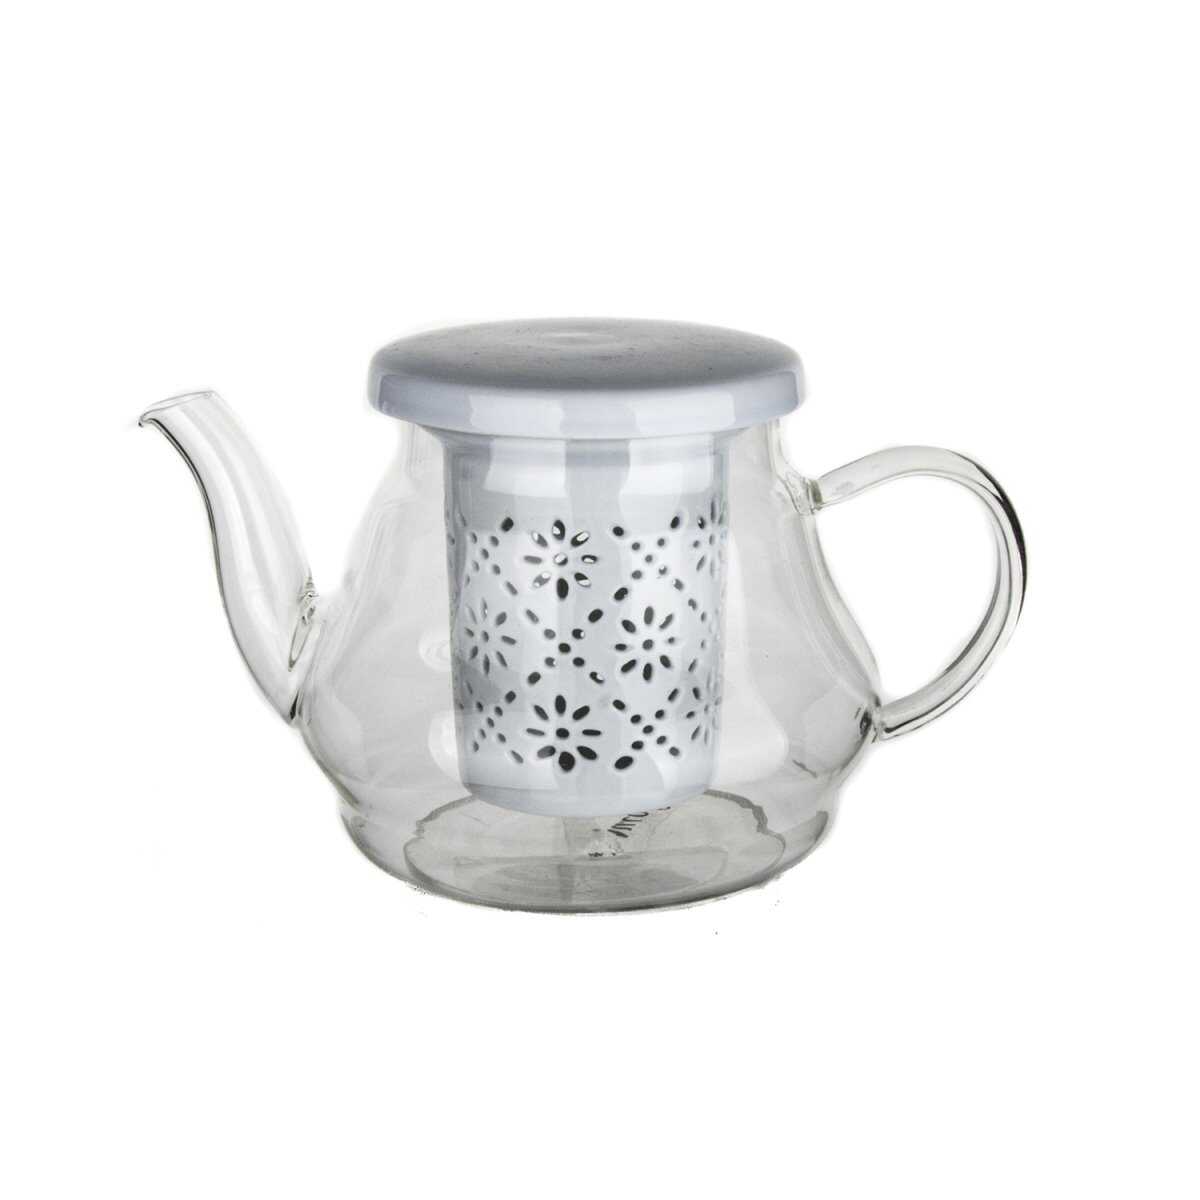 Ultraform Porcelain Teapot with Strainer and Lid Blue